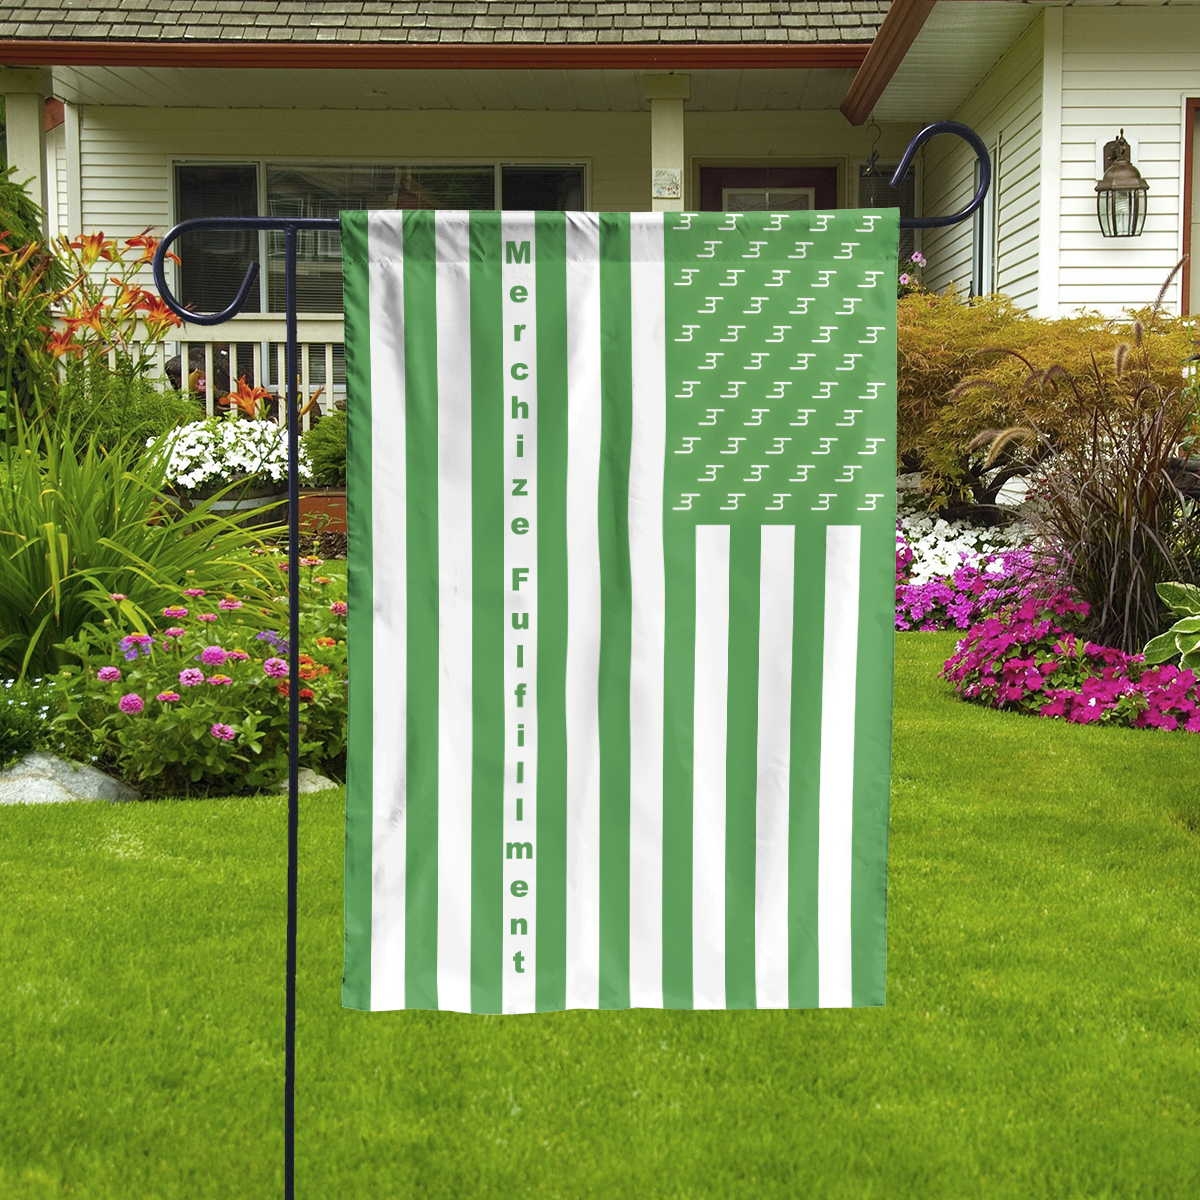 Garden Flag (Made in China)